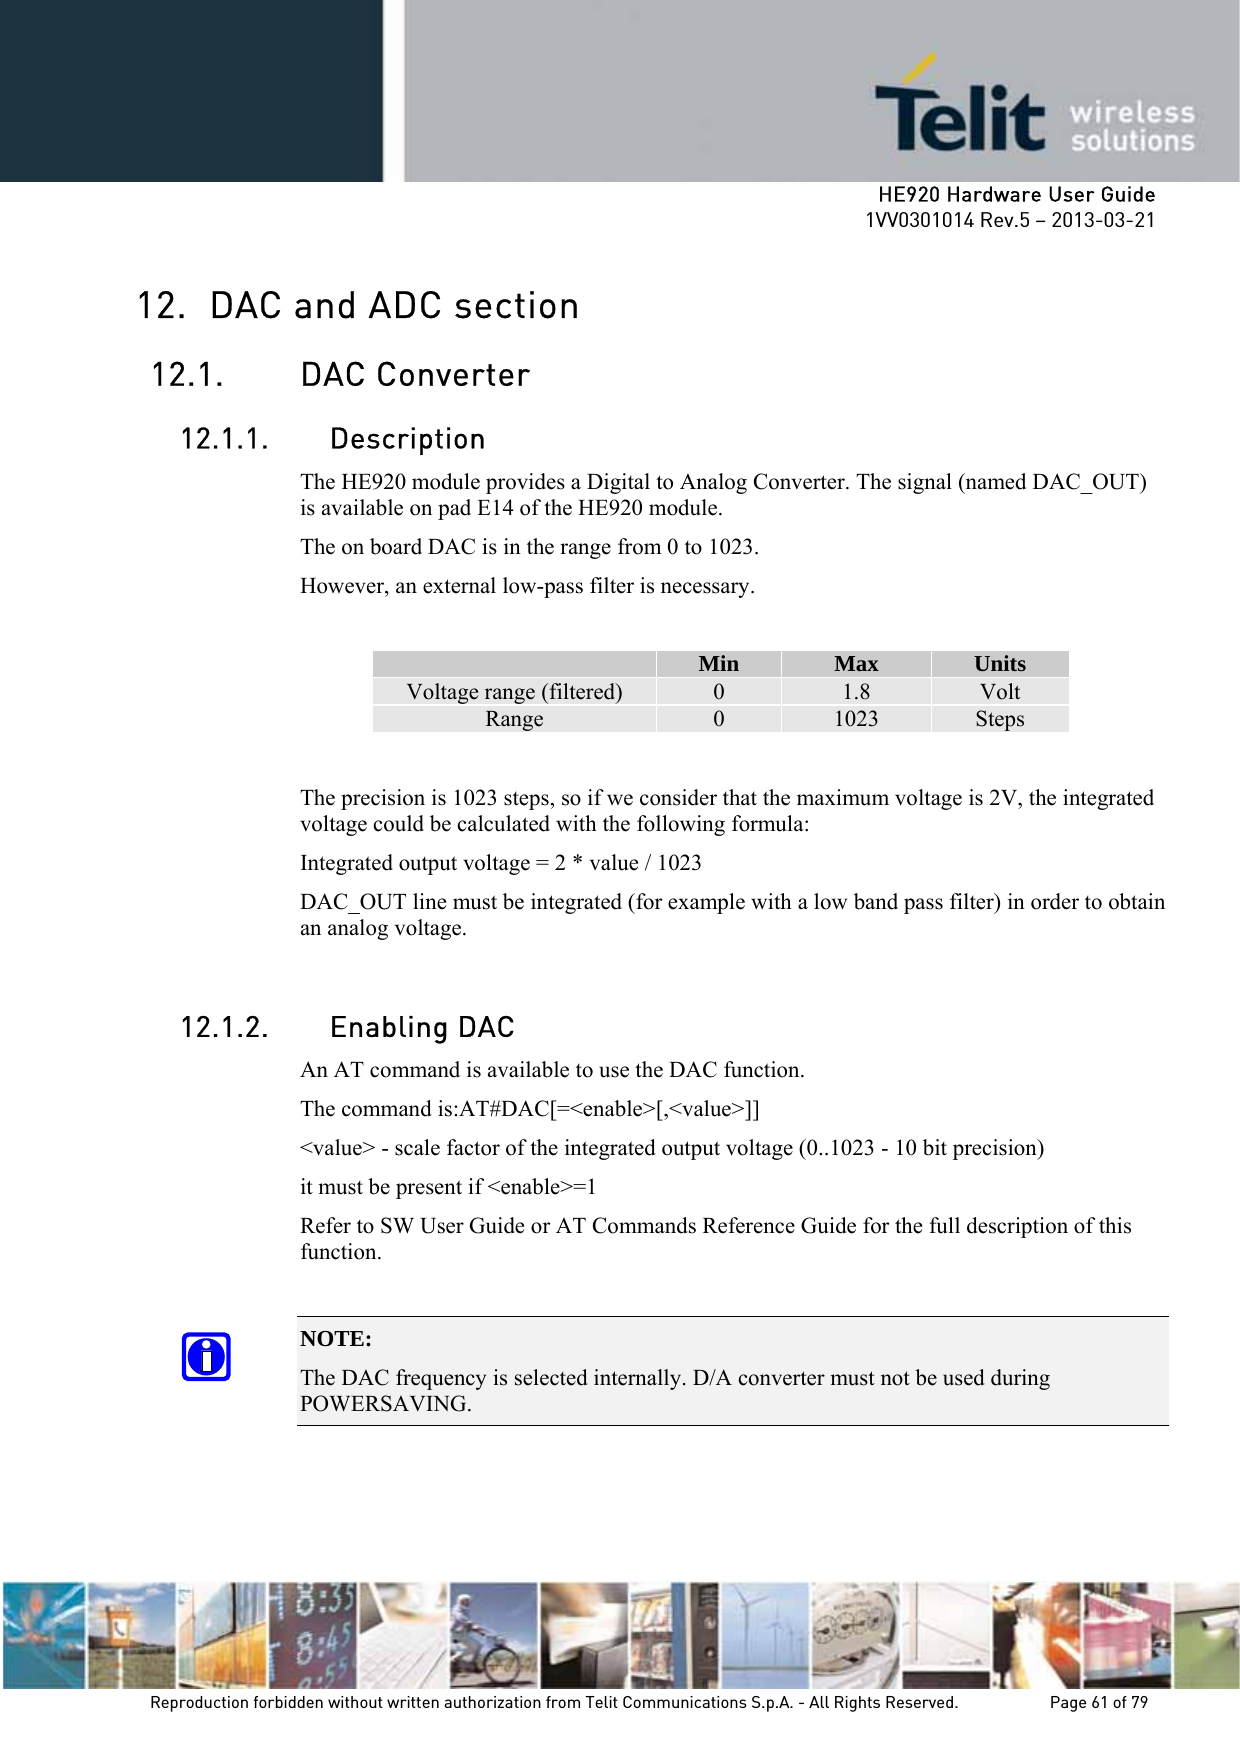     HE920 Hardware User Guide 1VV0301014 Rev.5 – 2013-03-21 Reproduction forbidden without written authorization from Telit Communications S.p.A. - All Rights Reserved.    Page 61 of 79  12. DAC and ADC section 12.1. DAC Converter 12.1.1. Description The HE920 module provides a Digital to Analog Converter. The signal (named DAC_OUT) is available on pad E14 of the HE920 module. The on board DAC is in the range from 0 to 1023.  However, an external low-pass filter is necessary.   Min  Max  Units Voltage range (filtered)  0  1.8  Volt Range  0  1023  Steps  The precision is 1023 steps, so if we consider that the maximum voltage is 2V, the integrated voltage could be calculated with the following formula: Integrated output voltage = 2 * value / 1023 DAC_OUT line must be integrated (for example with a low band pass filter) in order to obtain an analog voltage.  12.1.2. Enabling DAC An AT command is available to use the DAC function.  The command is:AT#DAC[=&lt;enable&gt;[,&lt;value&gt;]] &lt;value&gt; - scale factor of the integrated output voltage (0..1023 - 10 bit precision) it must be present if &lt;enable&gt;=1 Refer to SW User Guide or AT Commands Reference Guide for the full description of this function.  NOTE:  The DAC frequency is selected internally. D/A converter must not be used during POWERSAVING. 